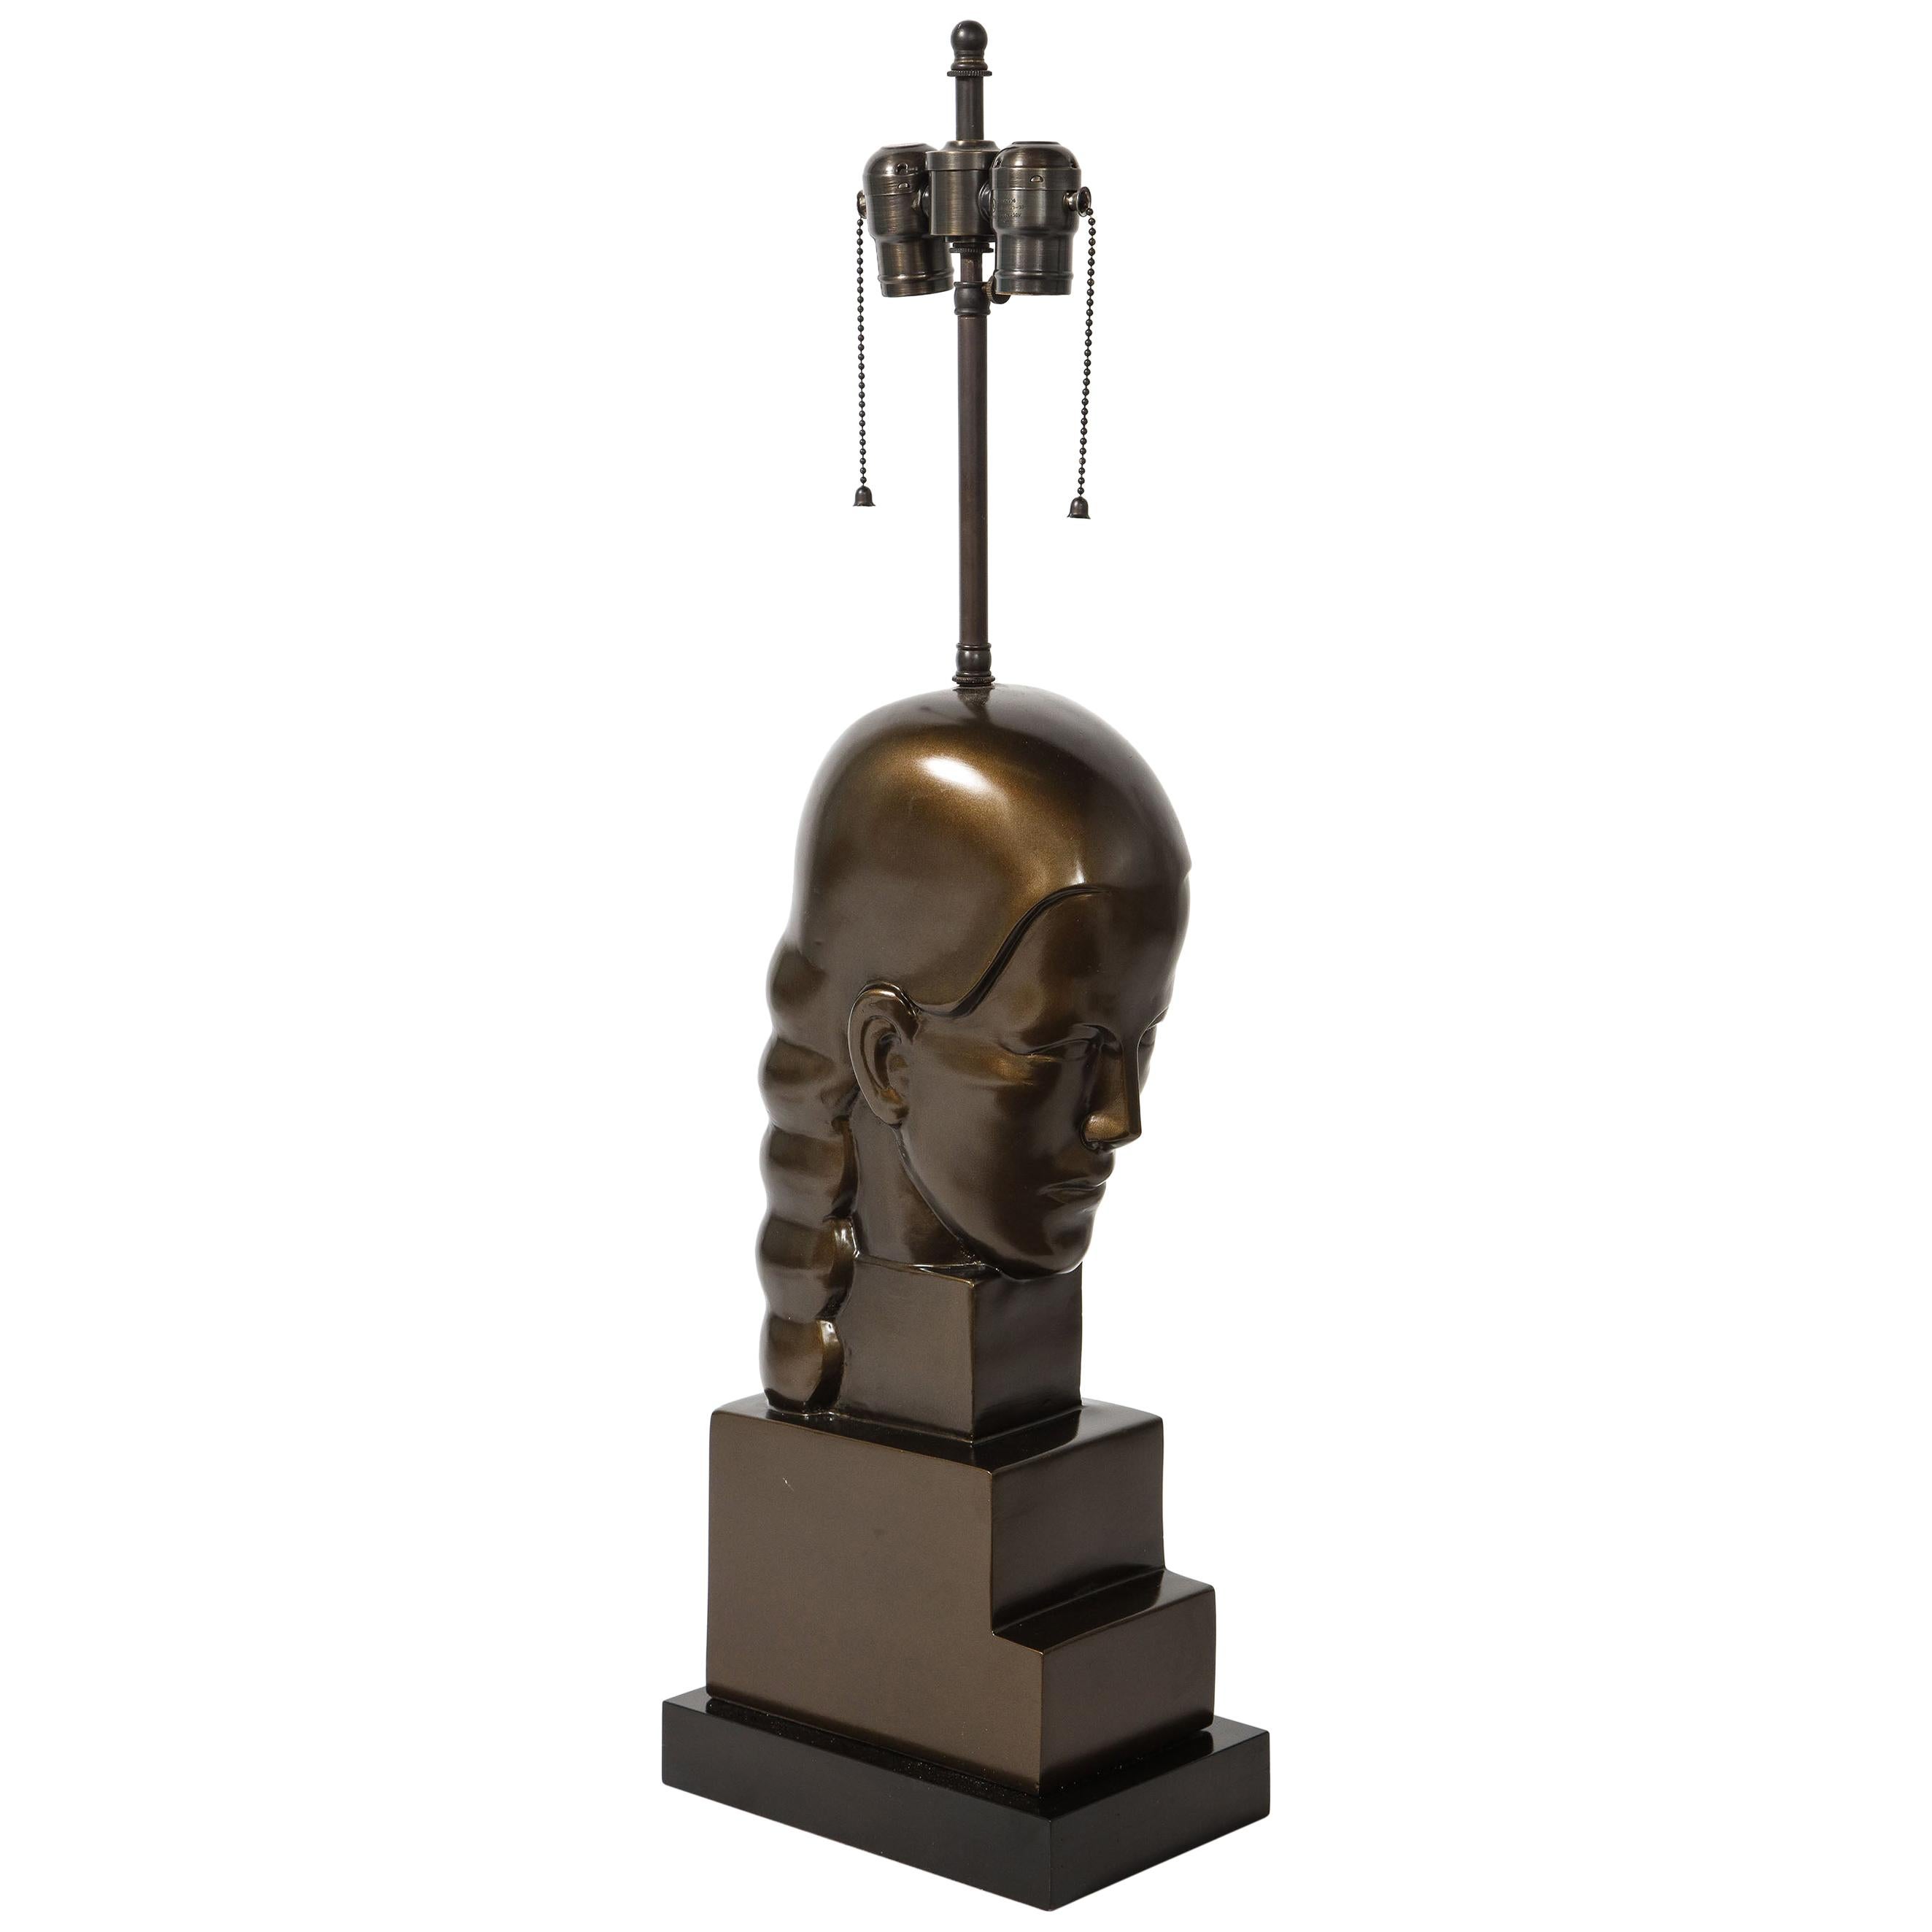 Metal Lamp of Bust form